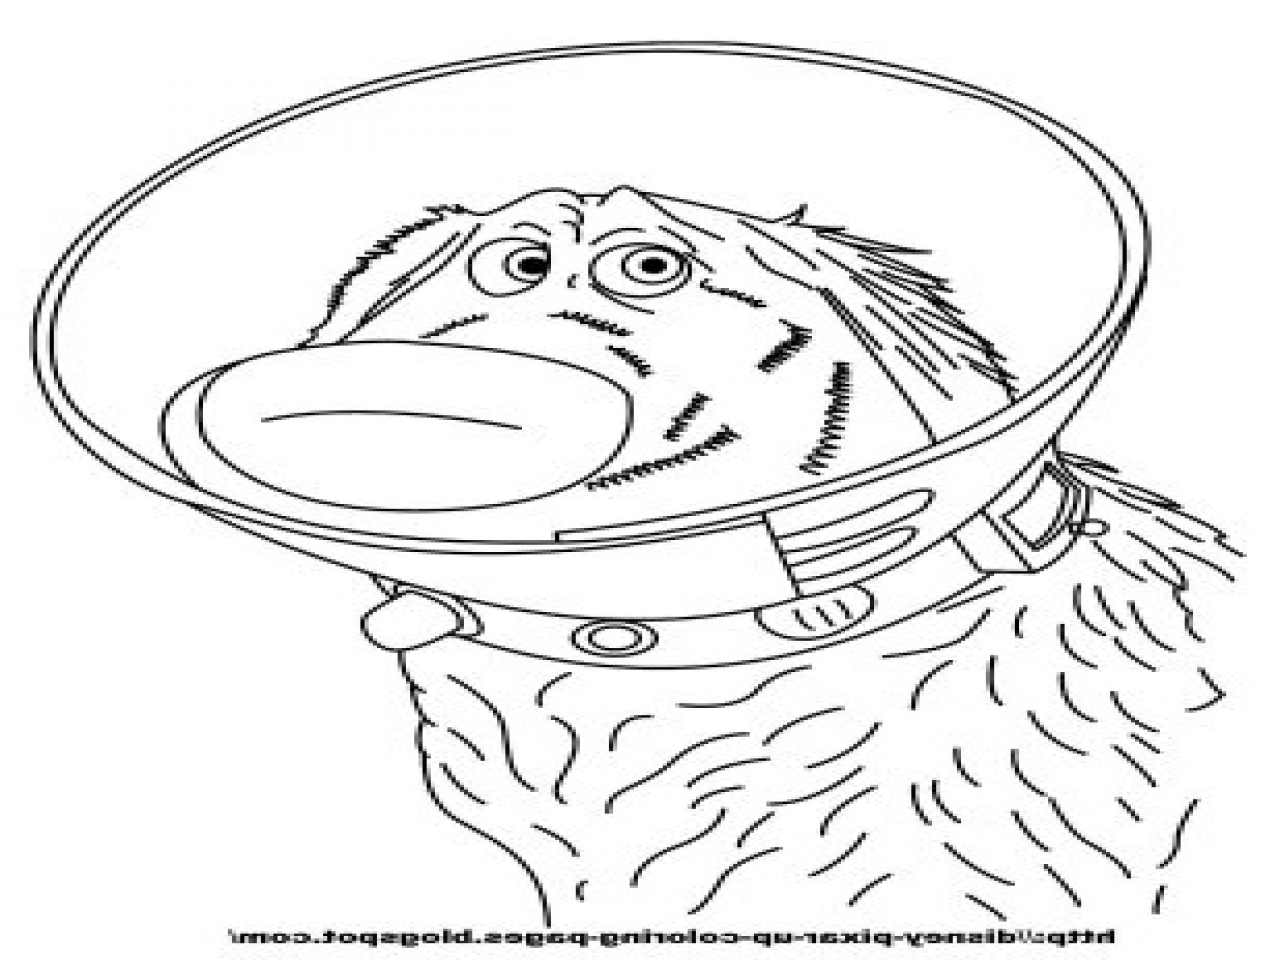 Up House Coloring Pages at GetColorings.com | Free printable colorings